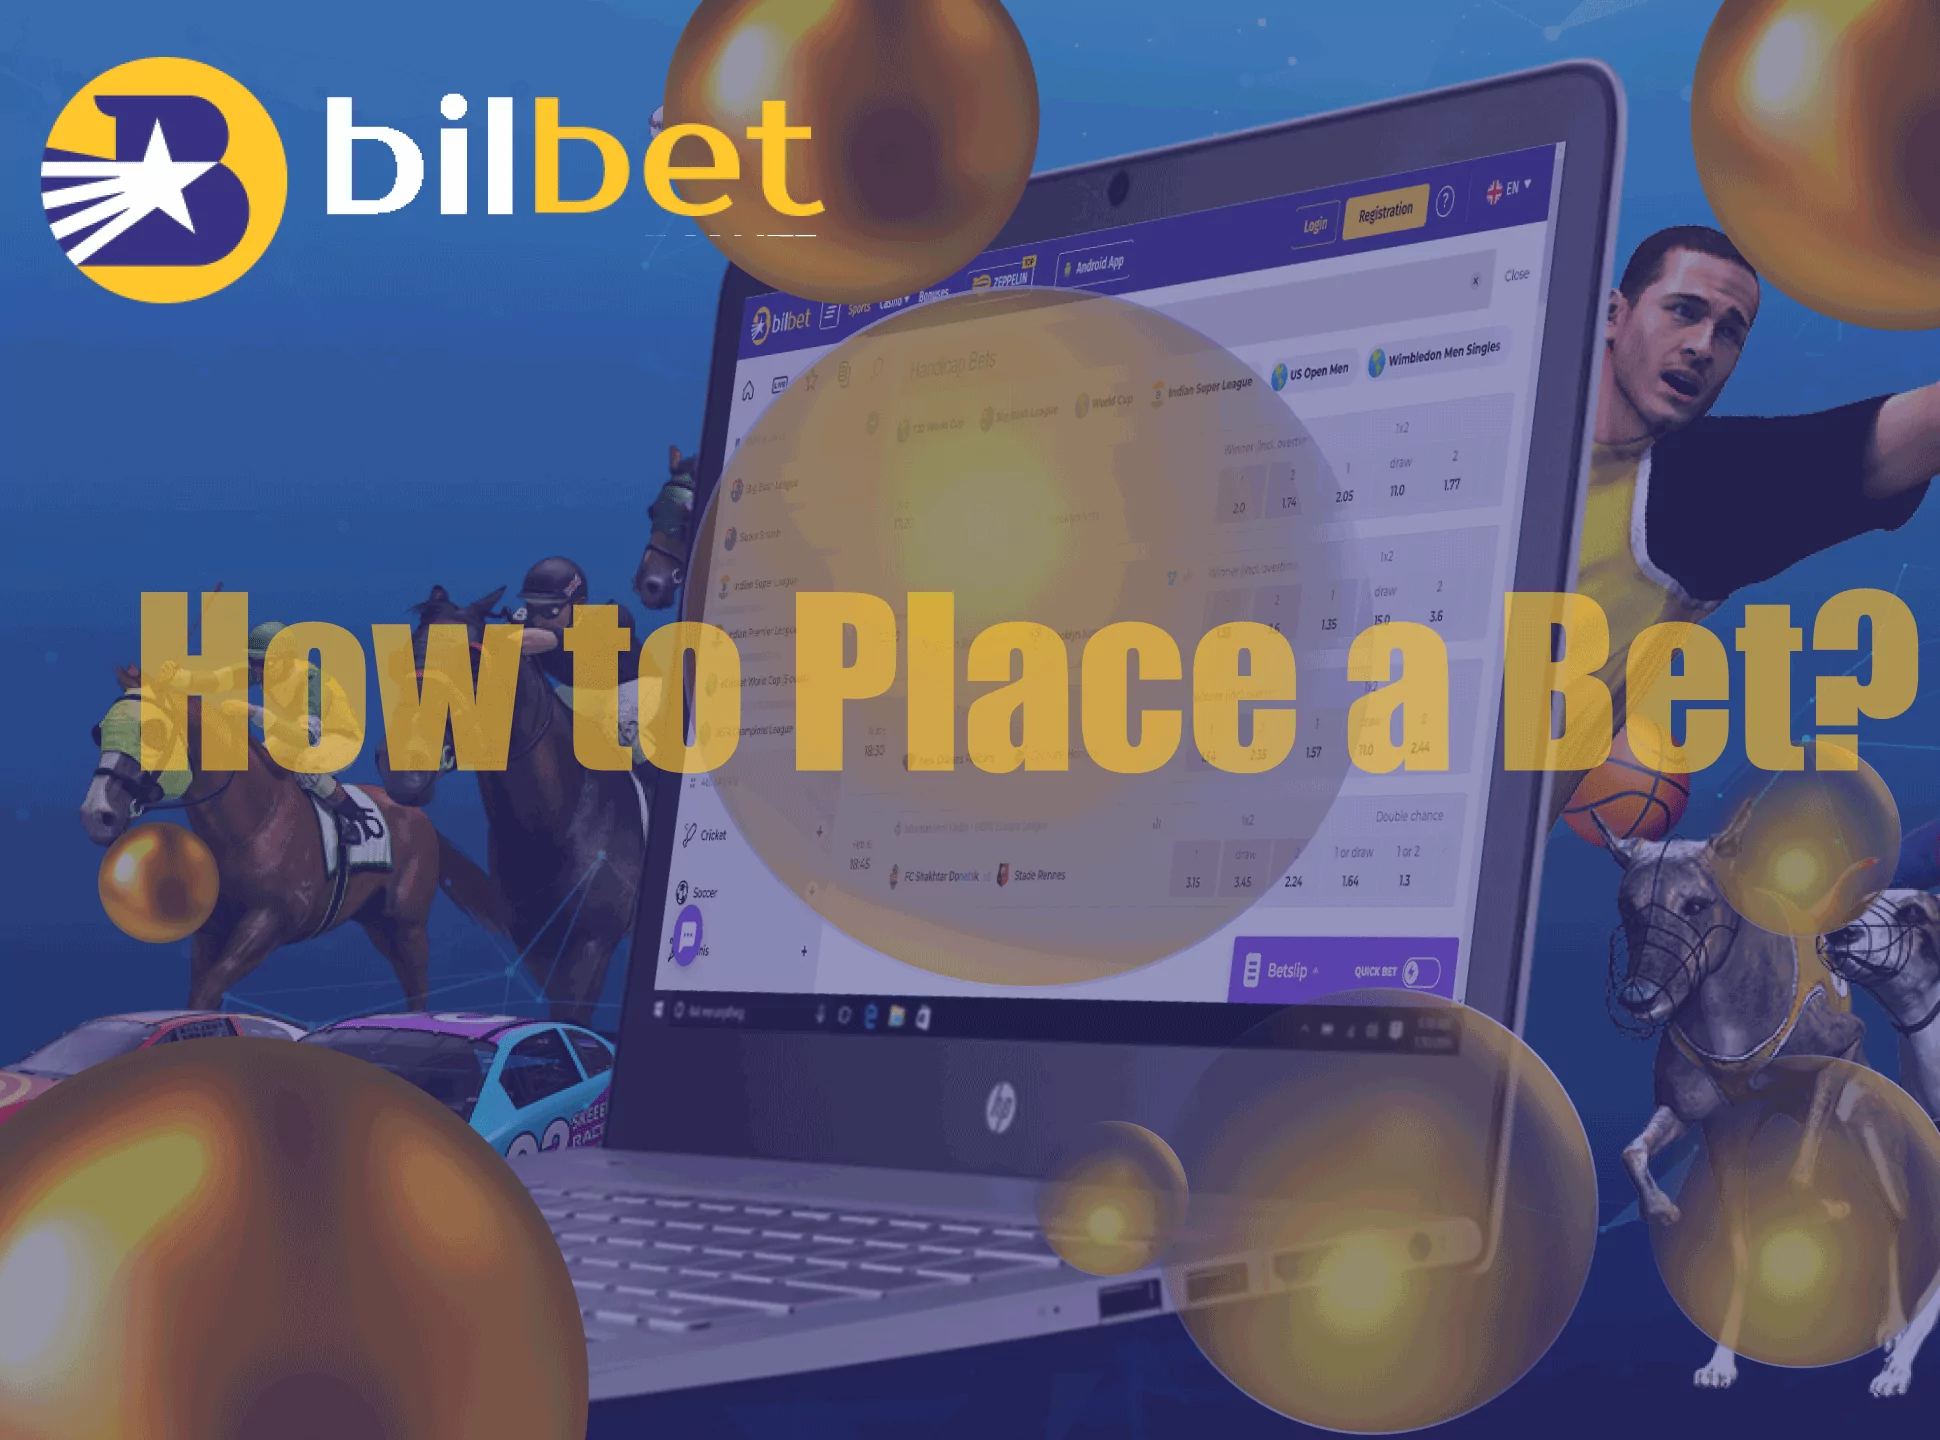 Log in to Bilbet, choose the sports event, specify the amount of money and place a bet.